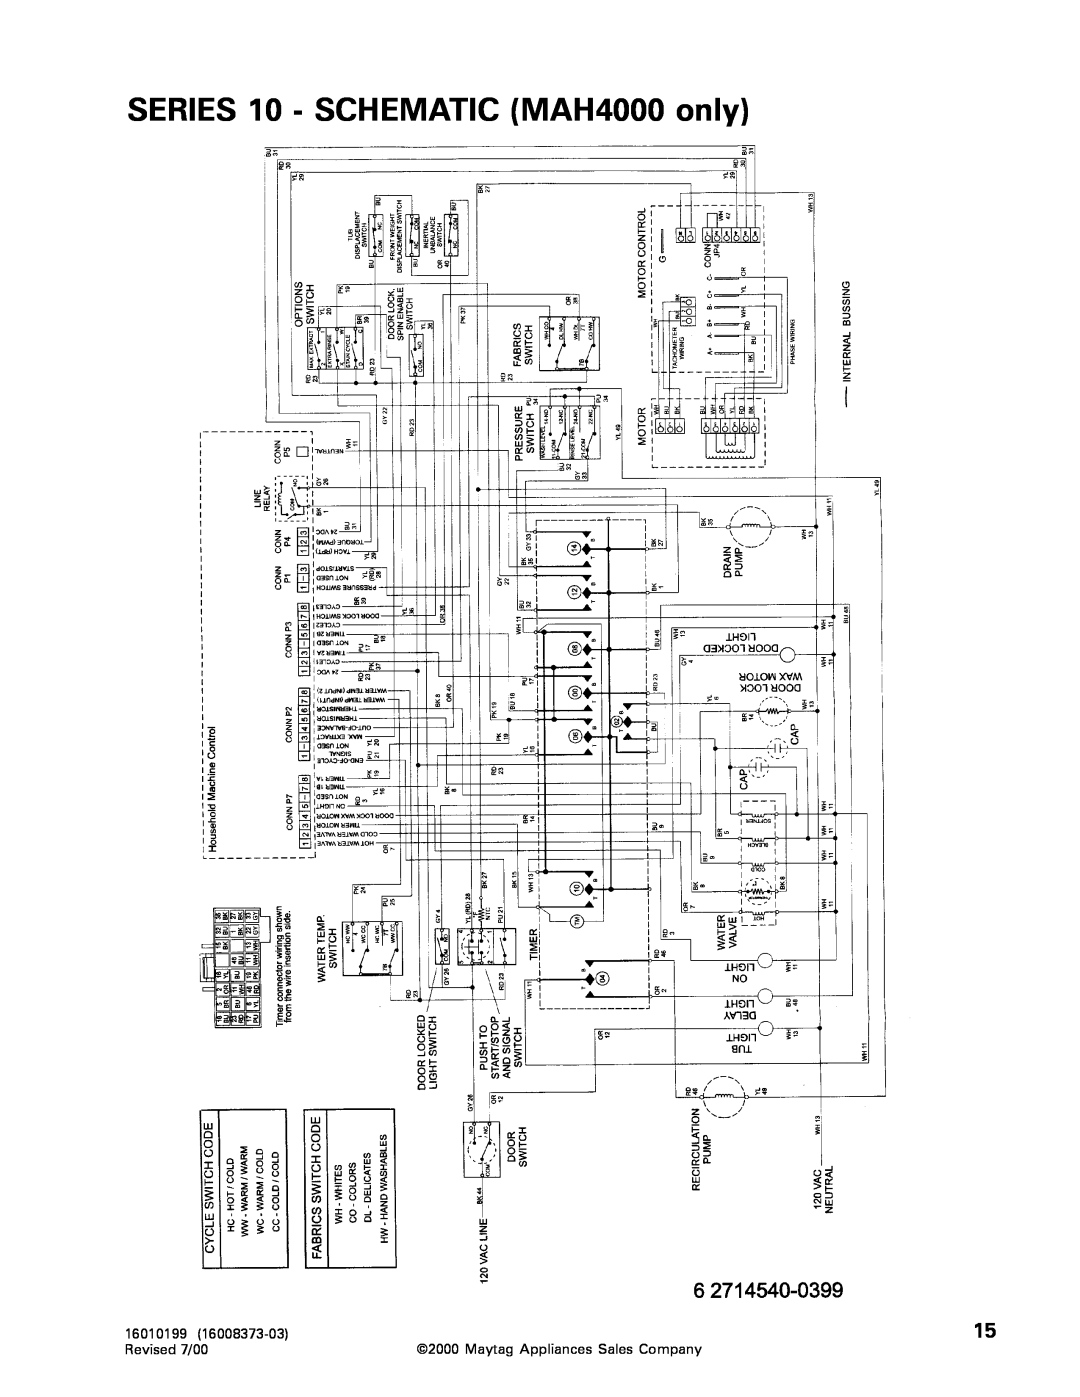 Whirlpool MAH3000 SERIES 10 - SCHEMATIC MAH4000 only, 16010199, Revised 7/00, Maytag Appliances Sales Company 